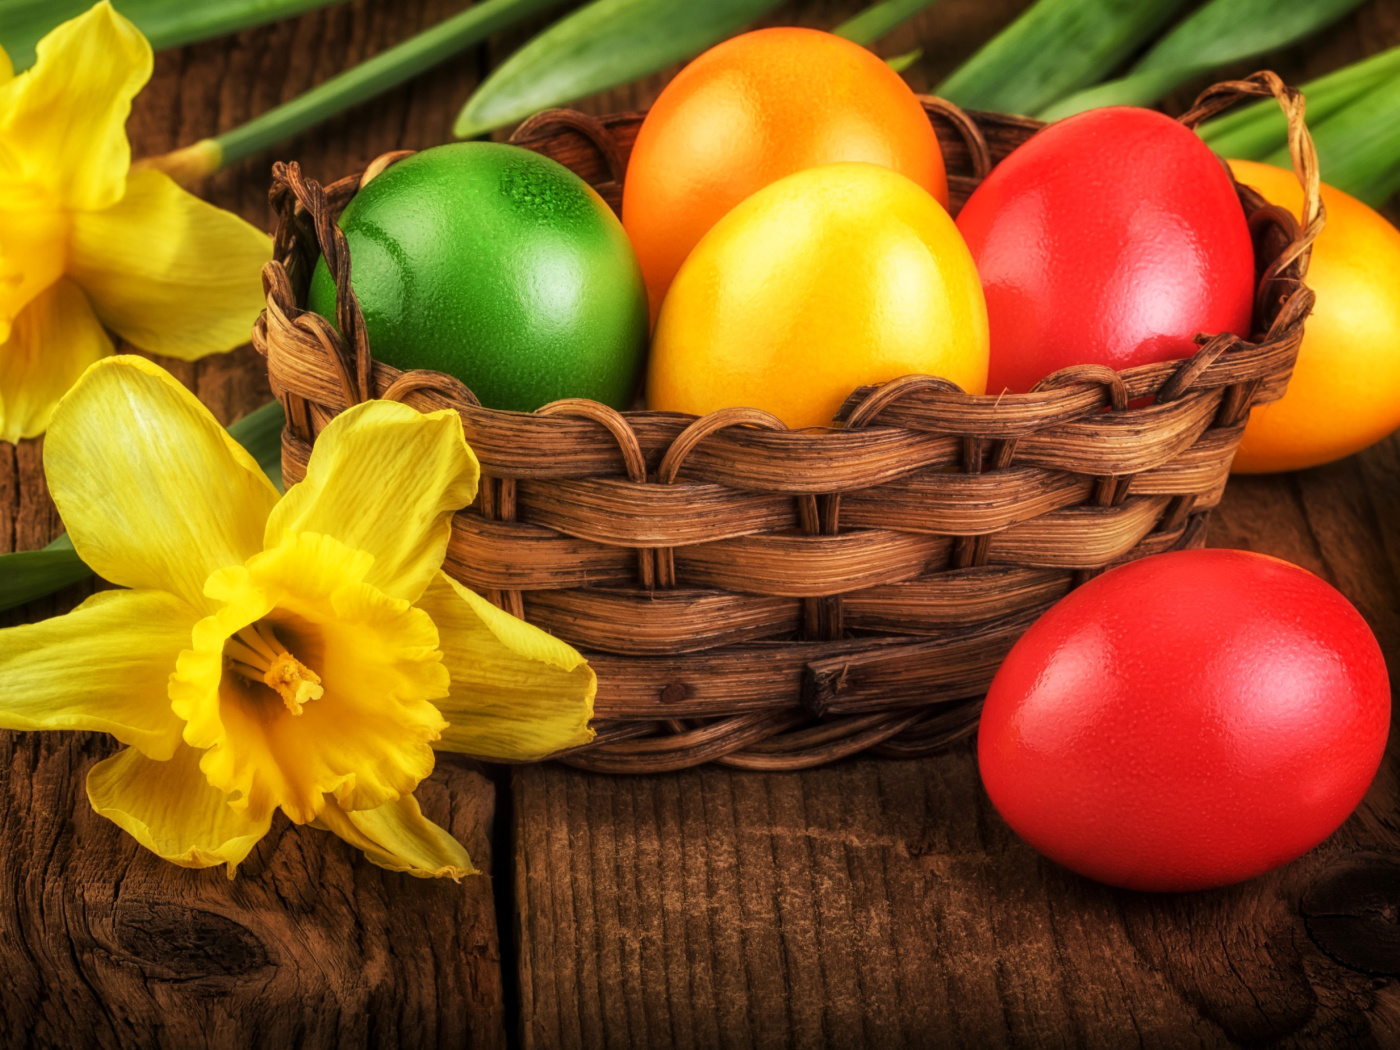 Daffodils and Easter Eggs wallpaper 1400x1050